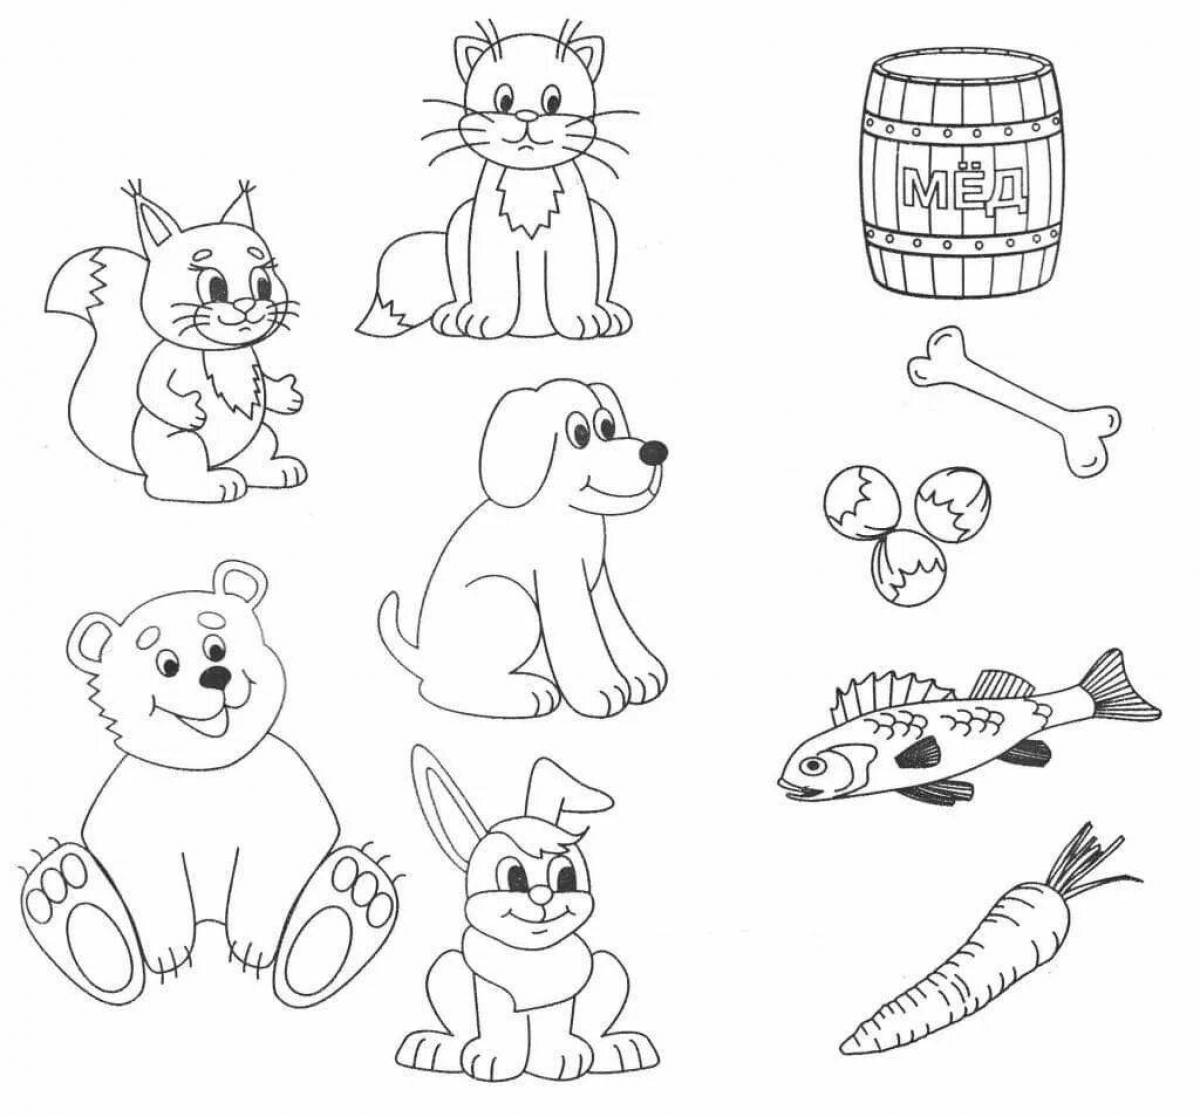 Stimulating coloring games for 4-5 year olds